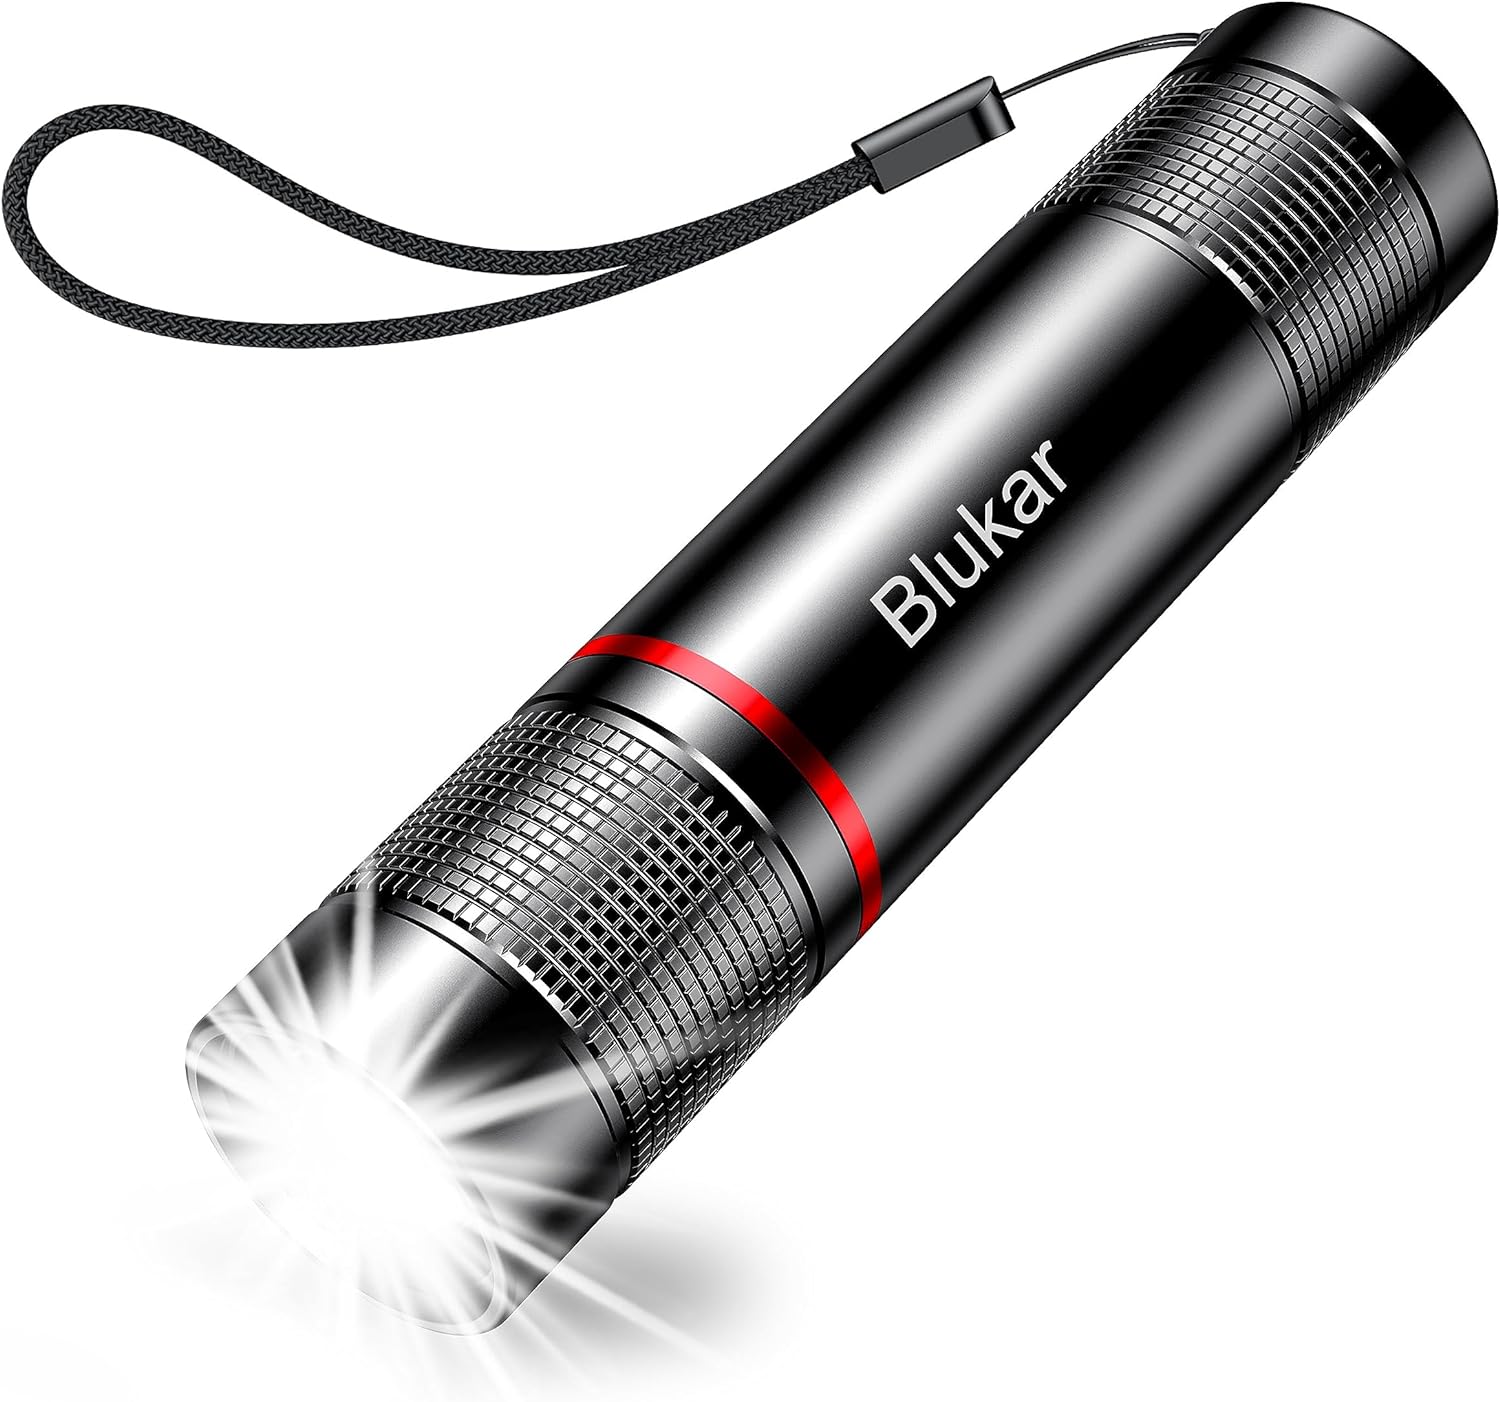 Blukar LED Torch Rechargeable, Super Bright Adjustable Focus Flashlight, 4 Lighting Modes, Long Battery Life, Waterproof Pocket Size Torch for Power Cuts, Emergency, Camping, Hiking, Outdoor           [Energy Class A+++]